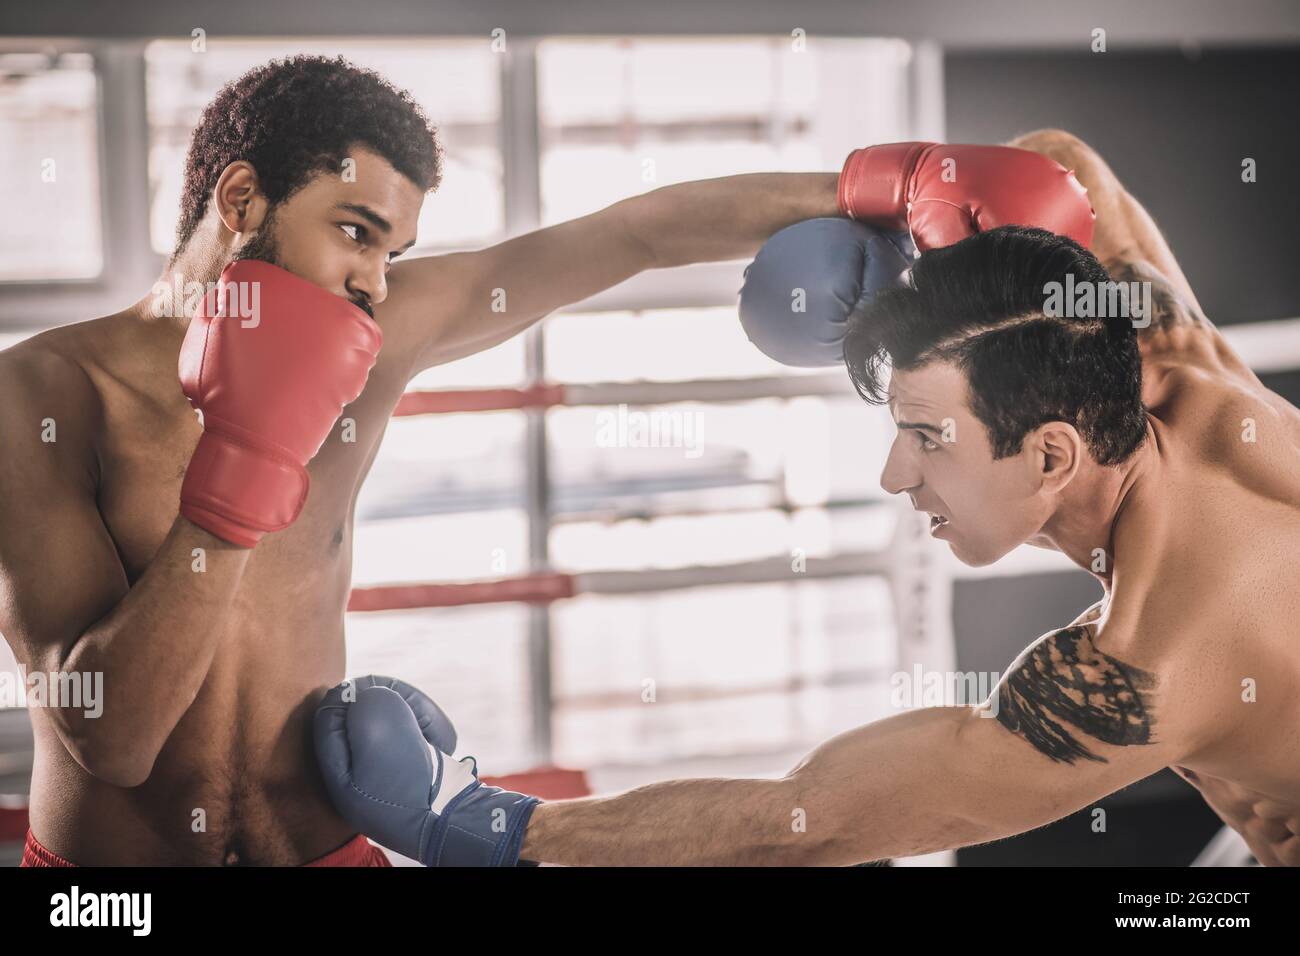 Two rivals having a fight on a boxing ring and looking aggressive Stock Photo